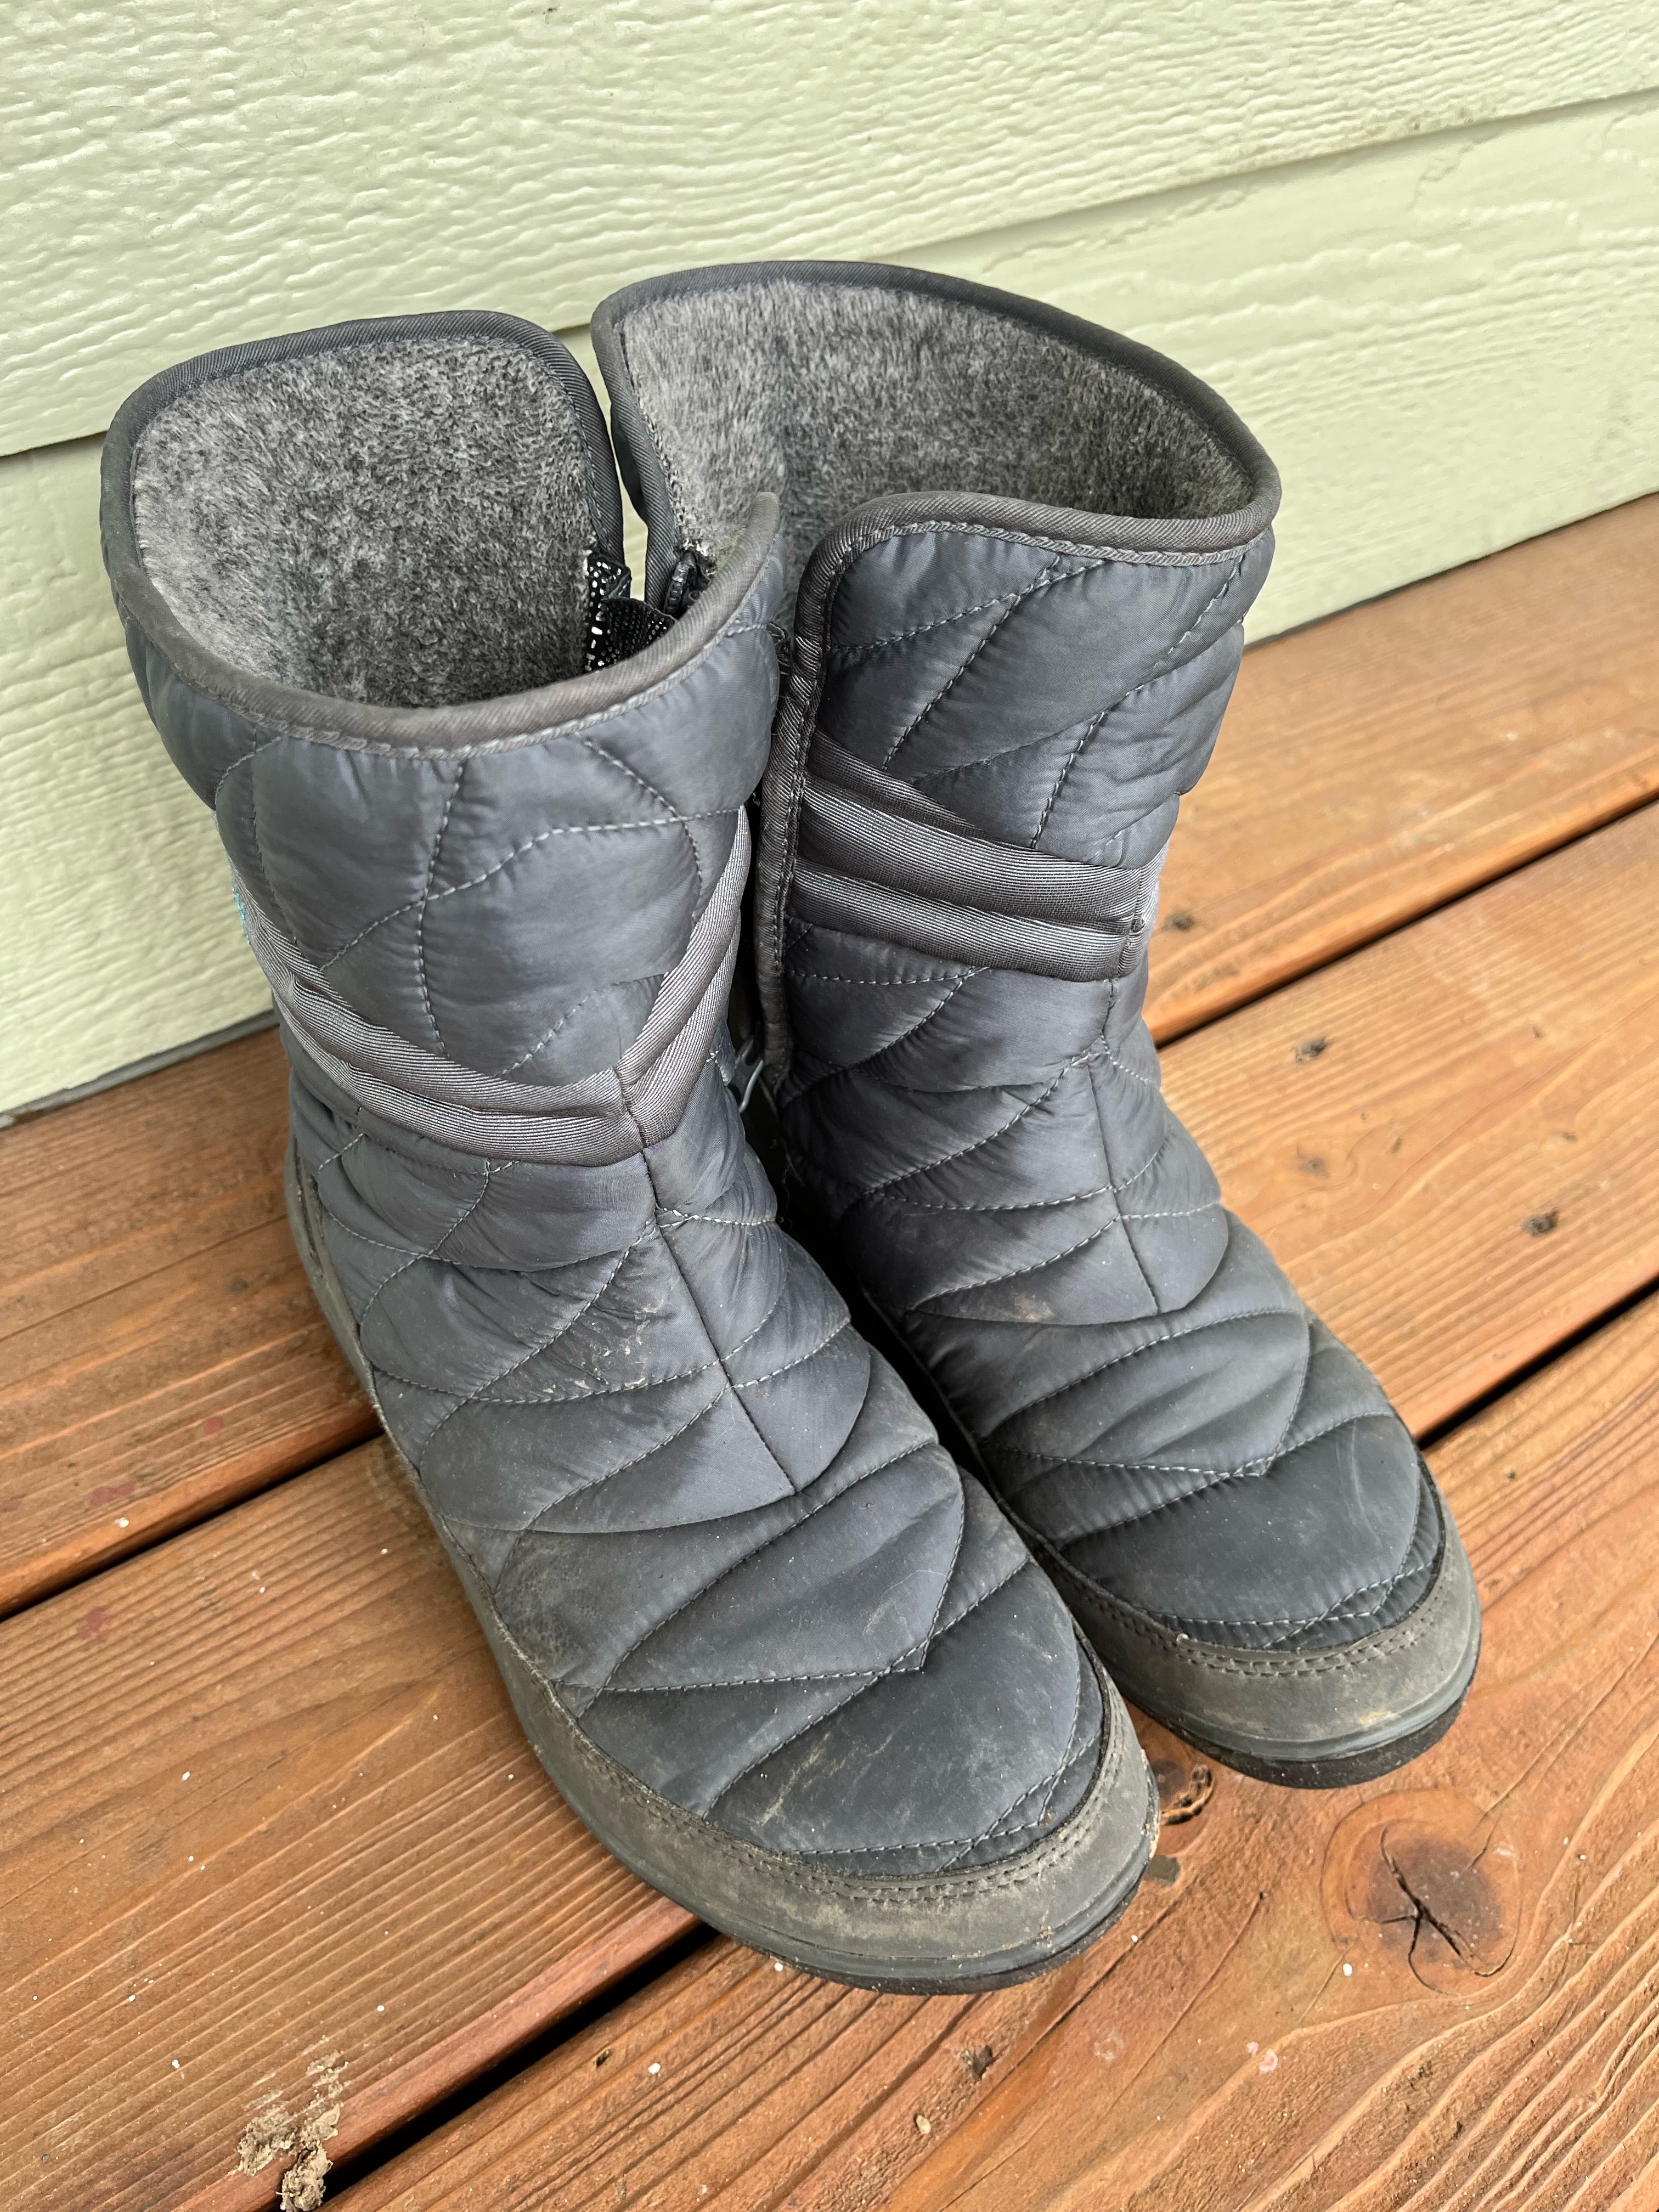 Columbia Heavenly Slip II Snow Boots in gray with gray fleece lining and side zipper